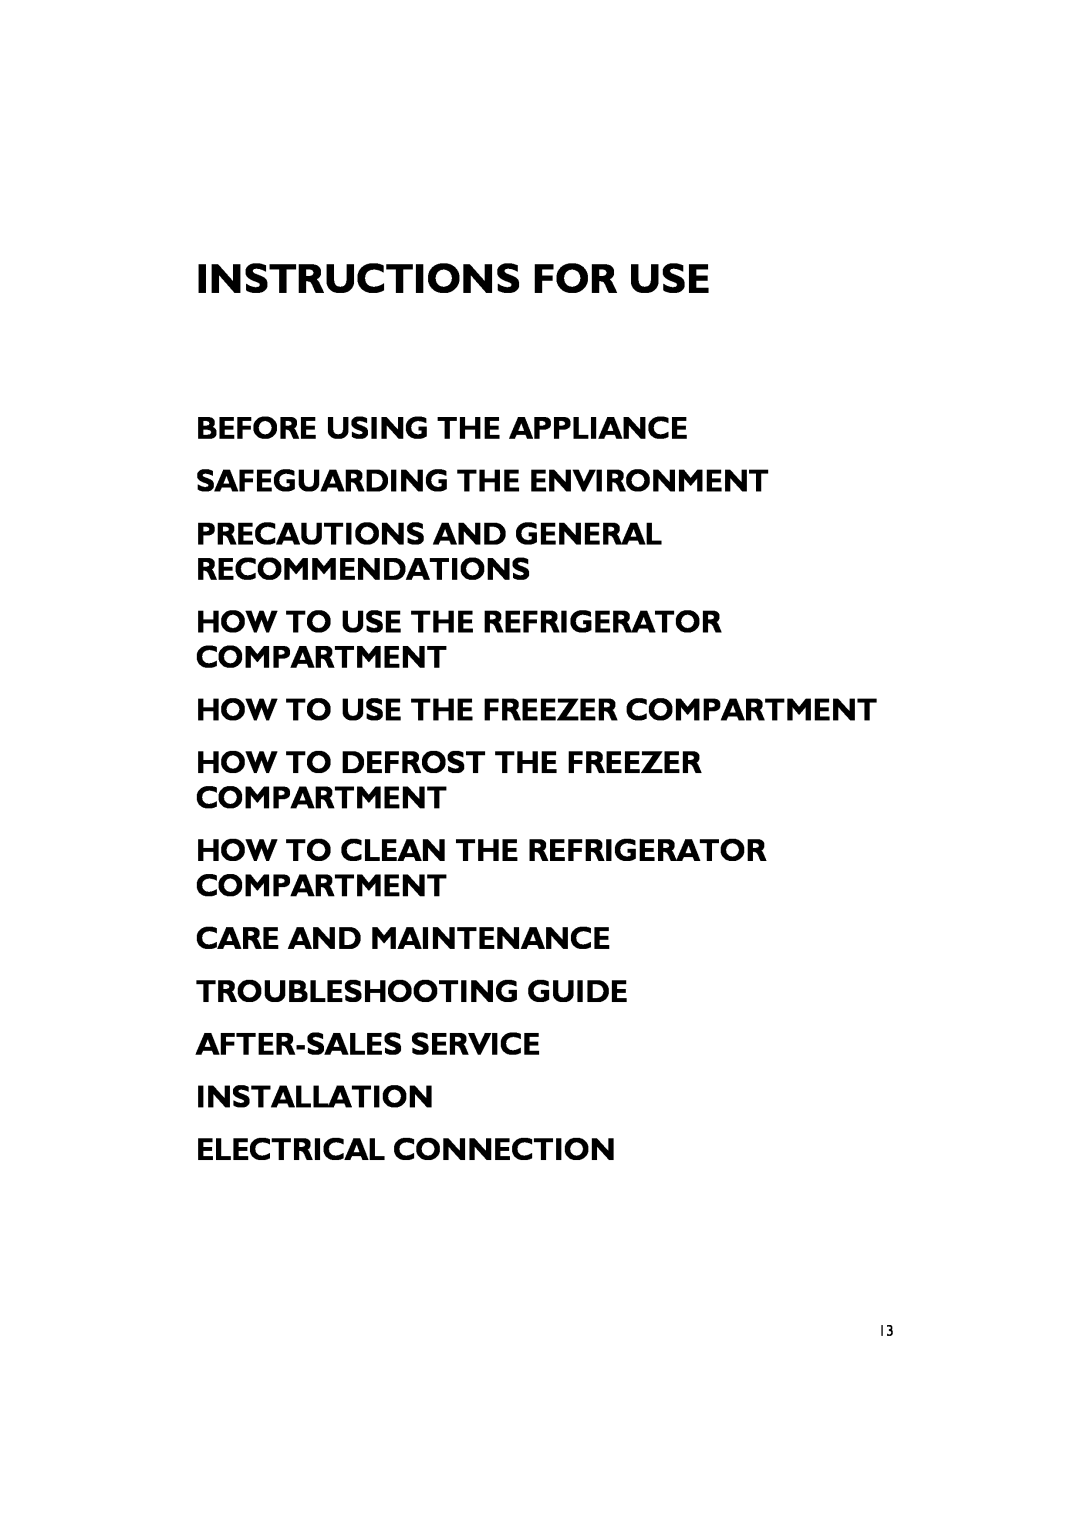 Smeg CR326AP7 manual Precautions And General Recommendations, How To Use The Refrigerator Compartment 